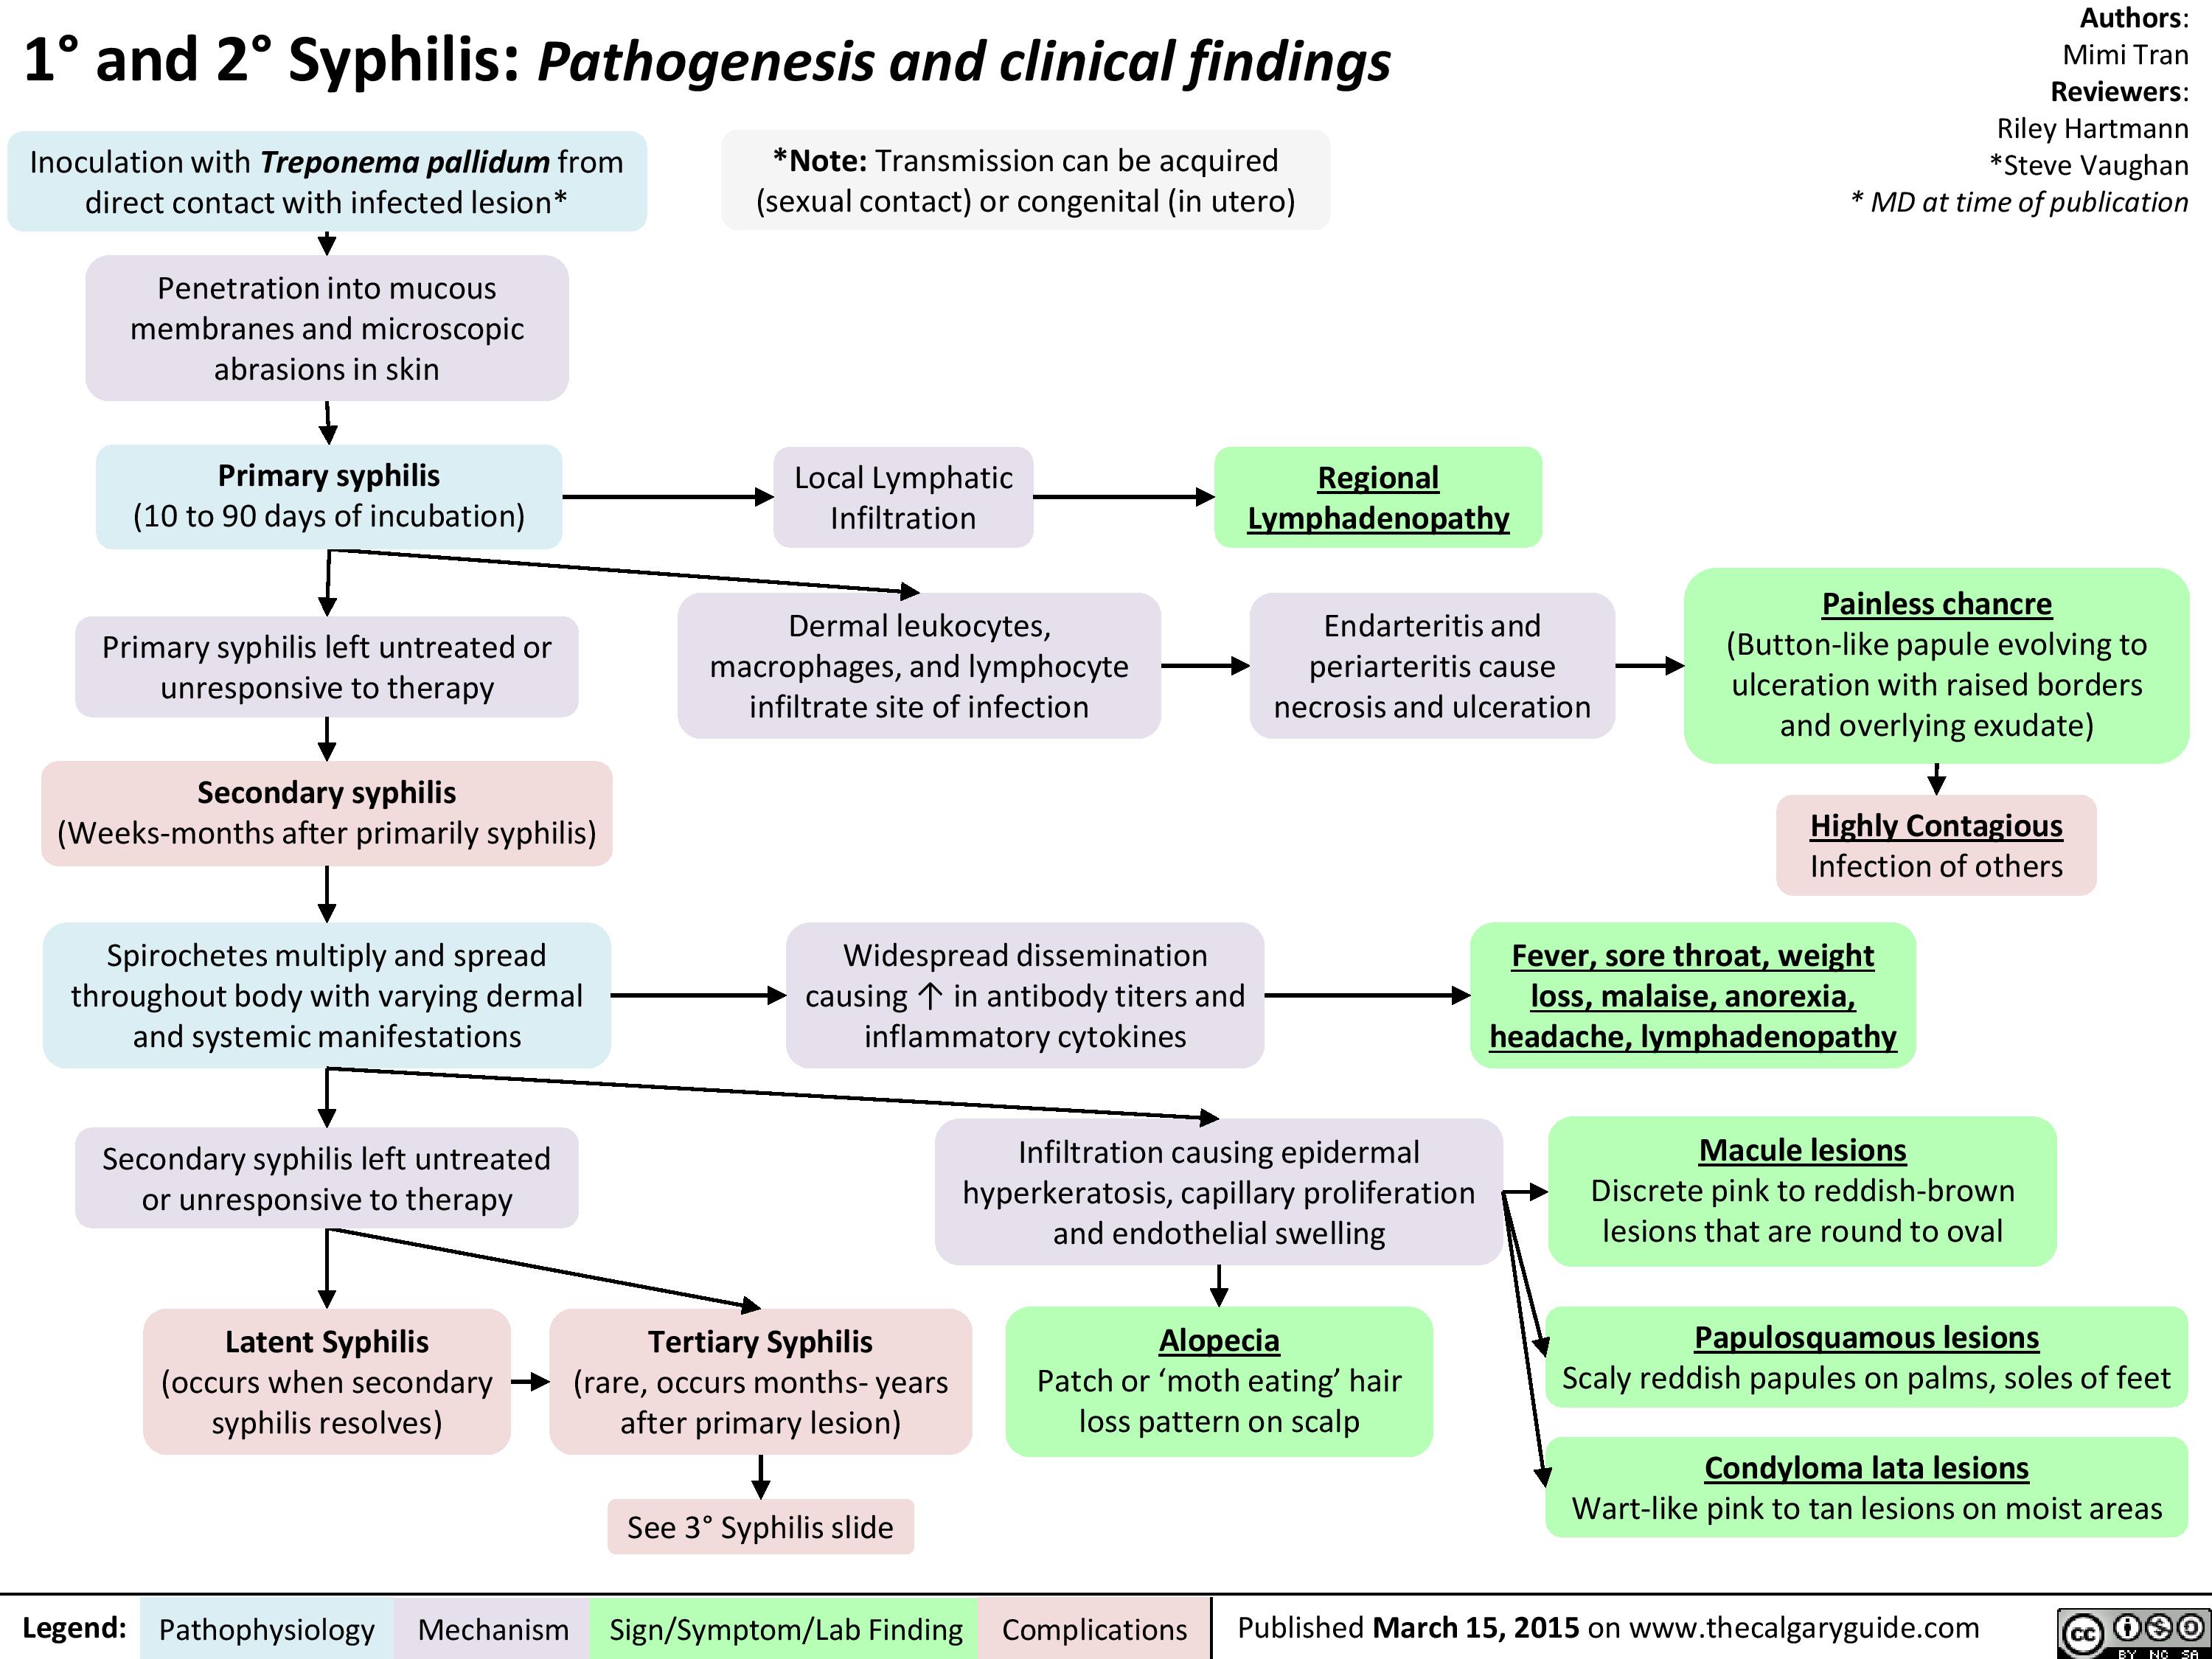 1° and 2° Syphilis Pathogenesis and clinical findings